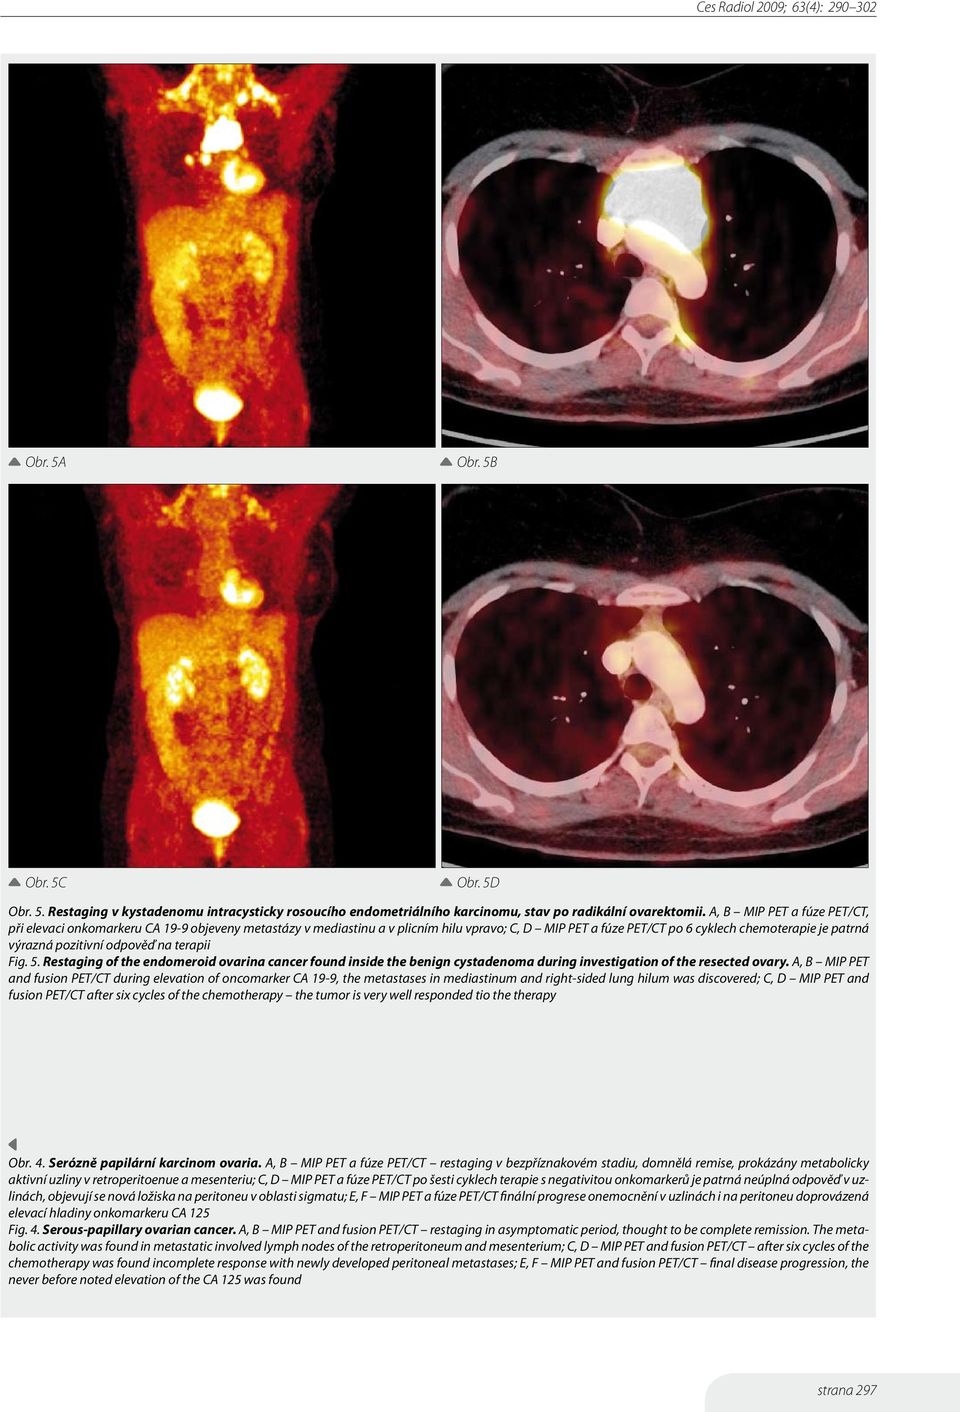 odpověď na terapii Fig. 5. Restaging of the endomeroid ovarina cancer found inside the benign cystadenoma during investigation of the resected ovary.